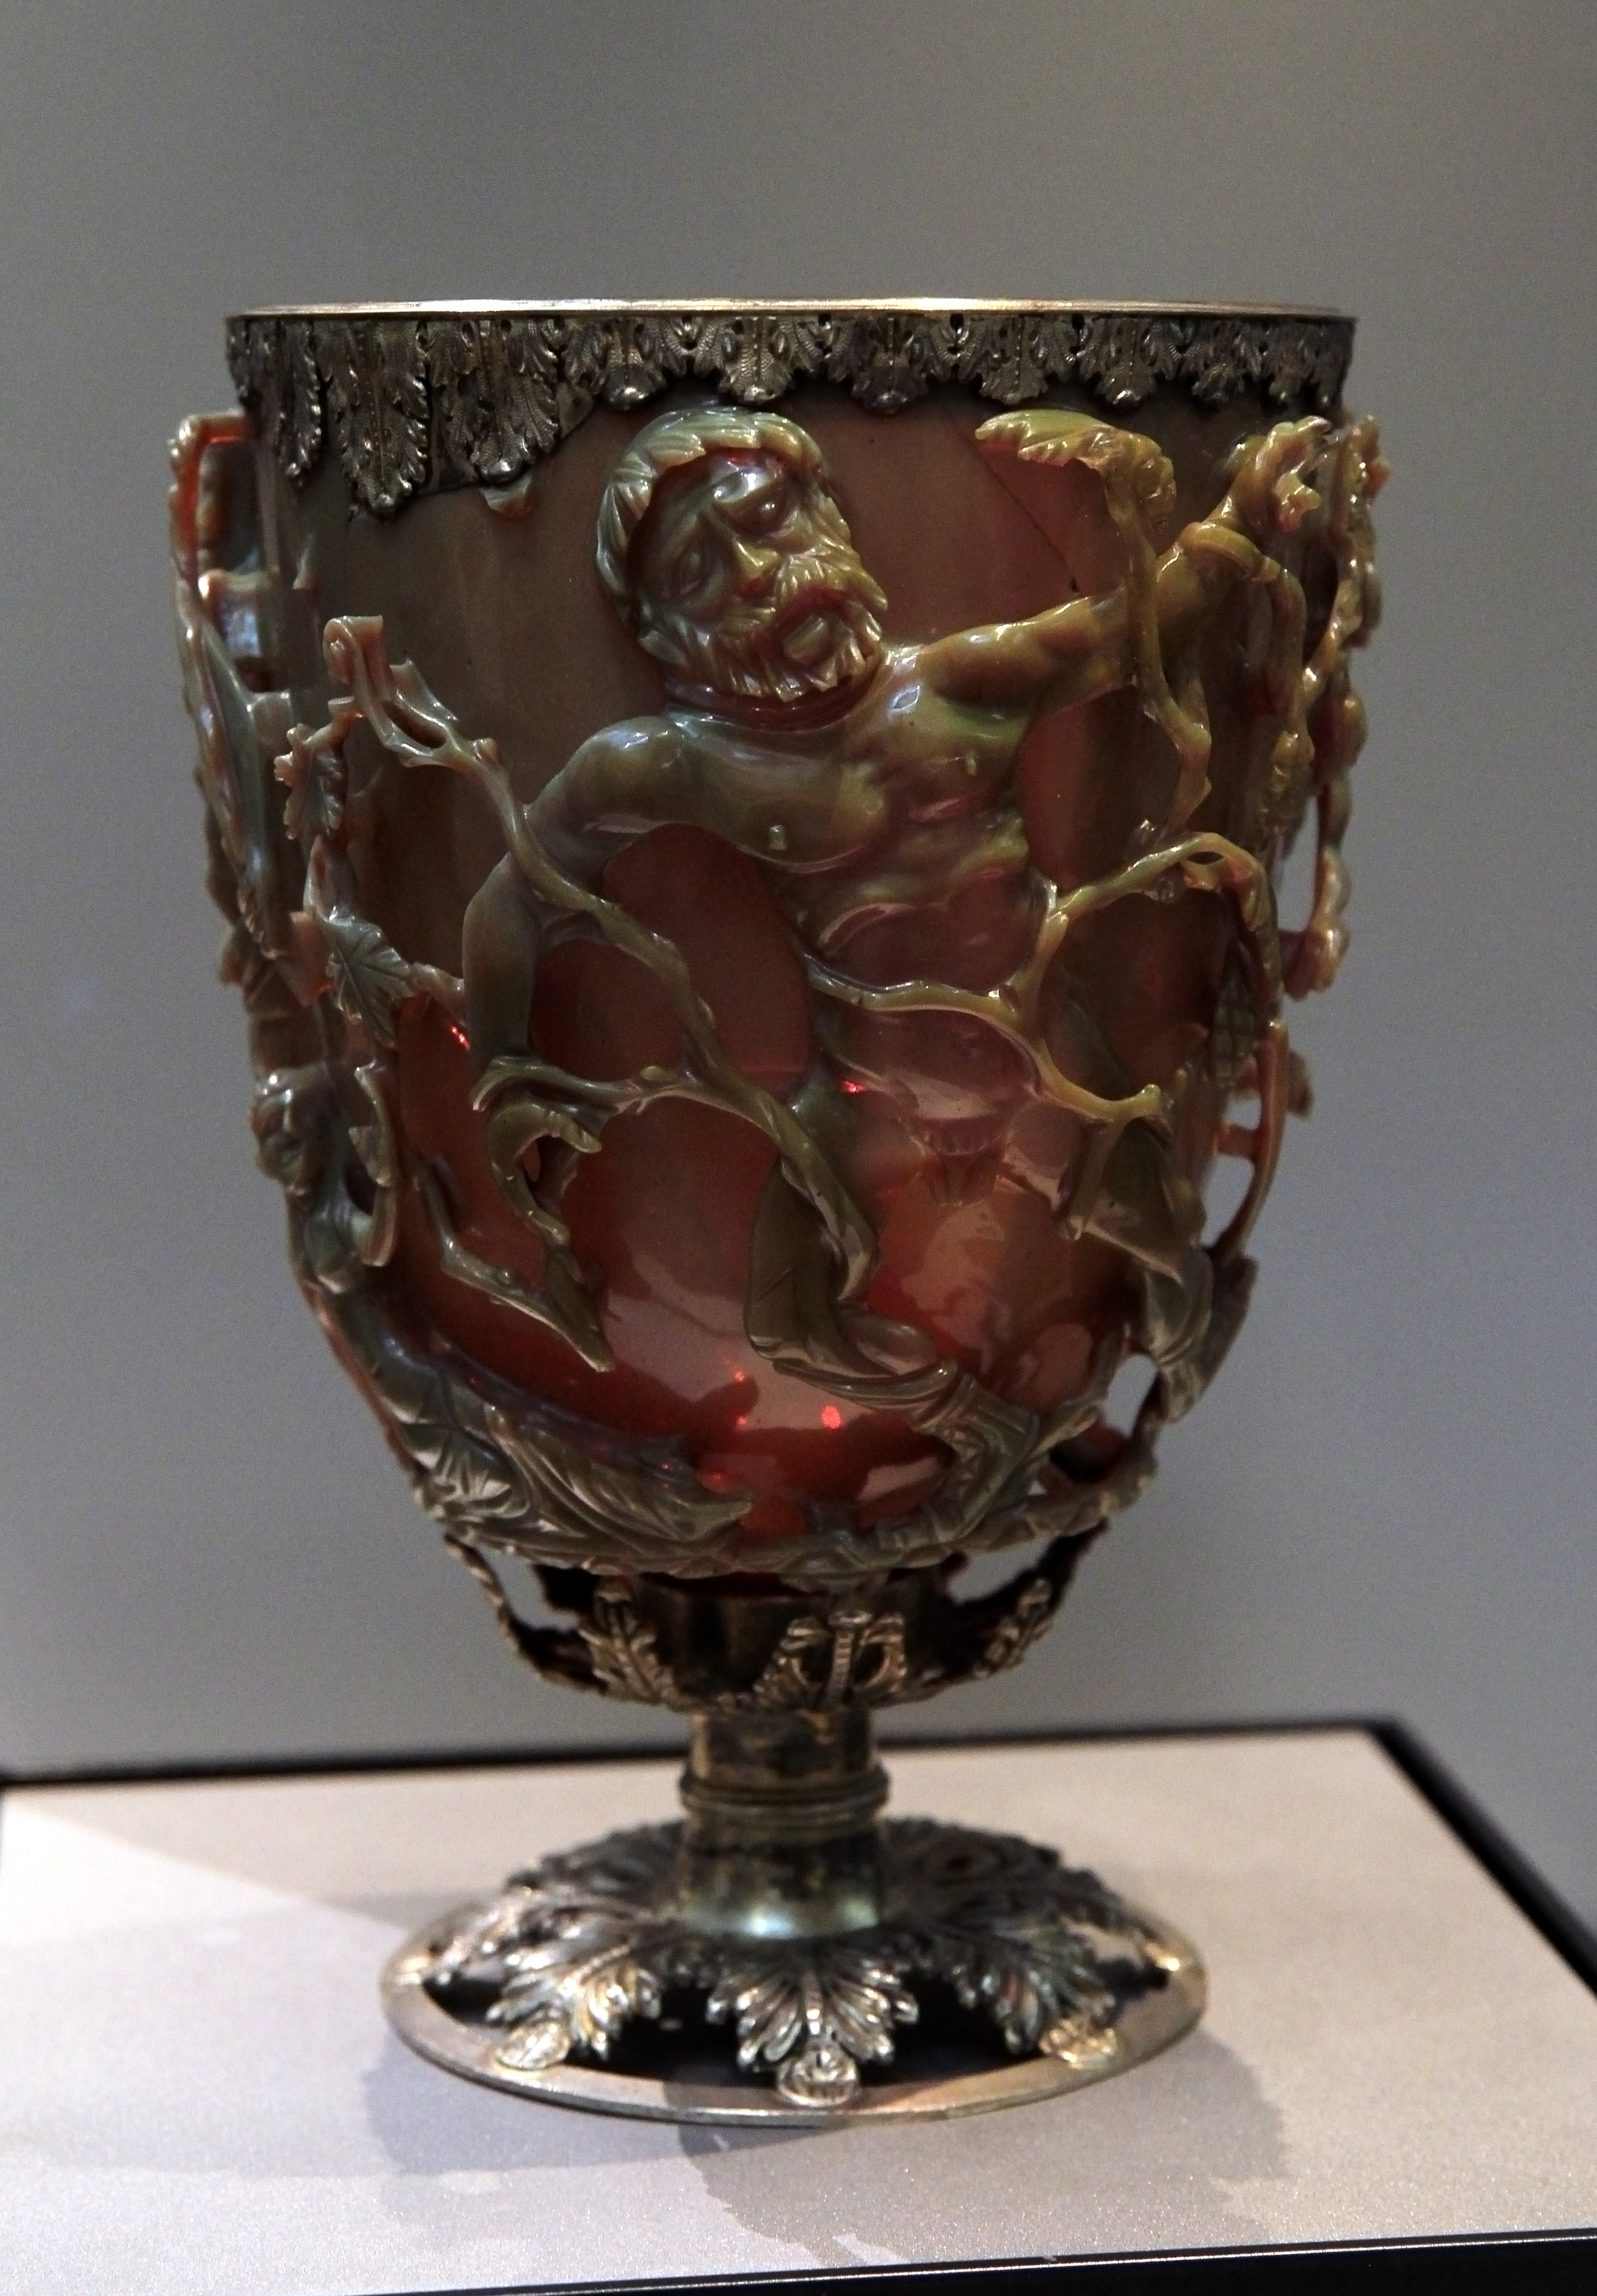 Lycurgus Cup - Wikipedia